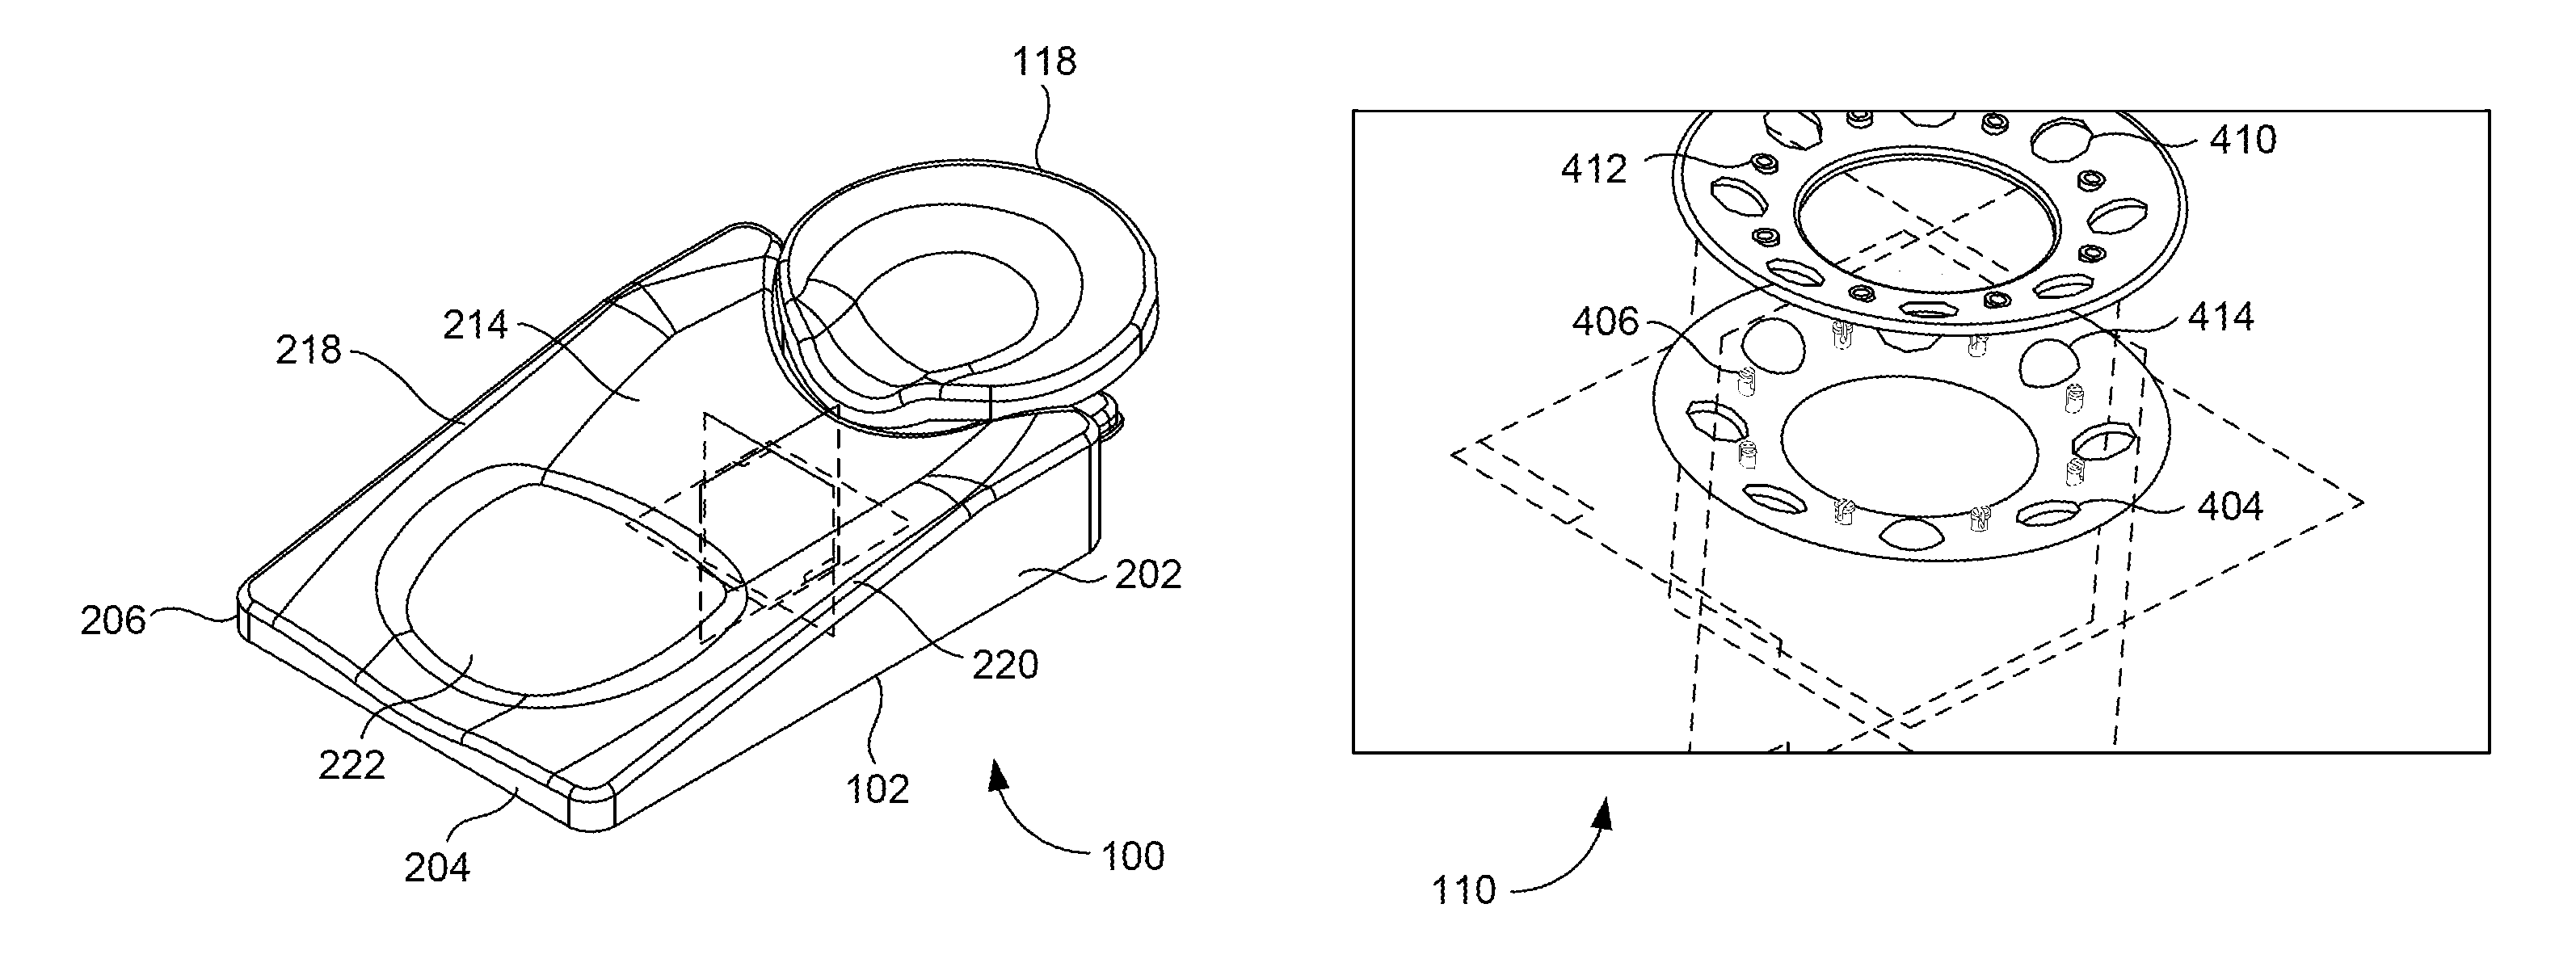 Infant head cradle with controlled head movement